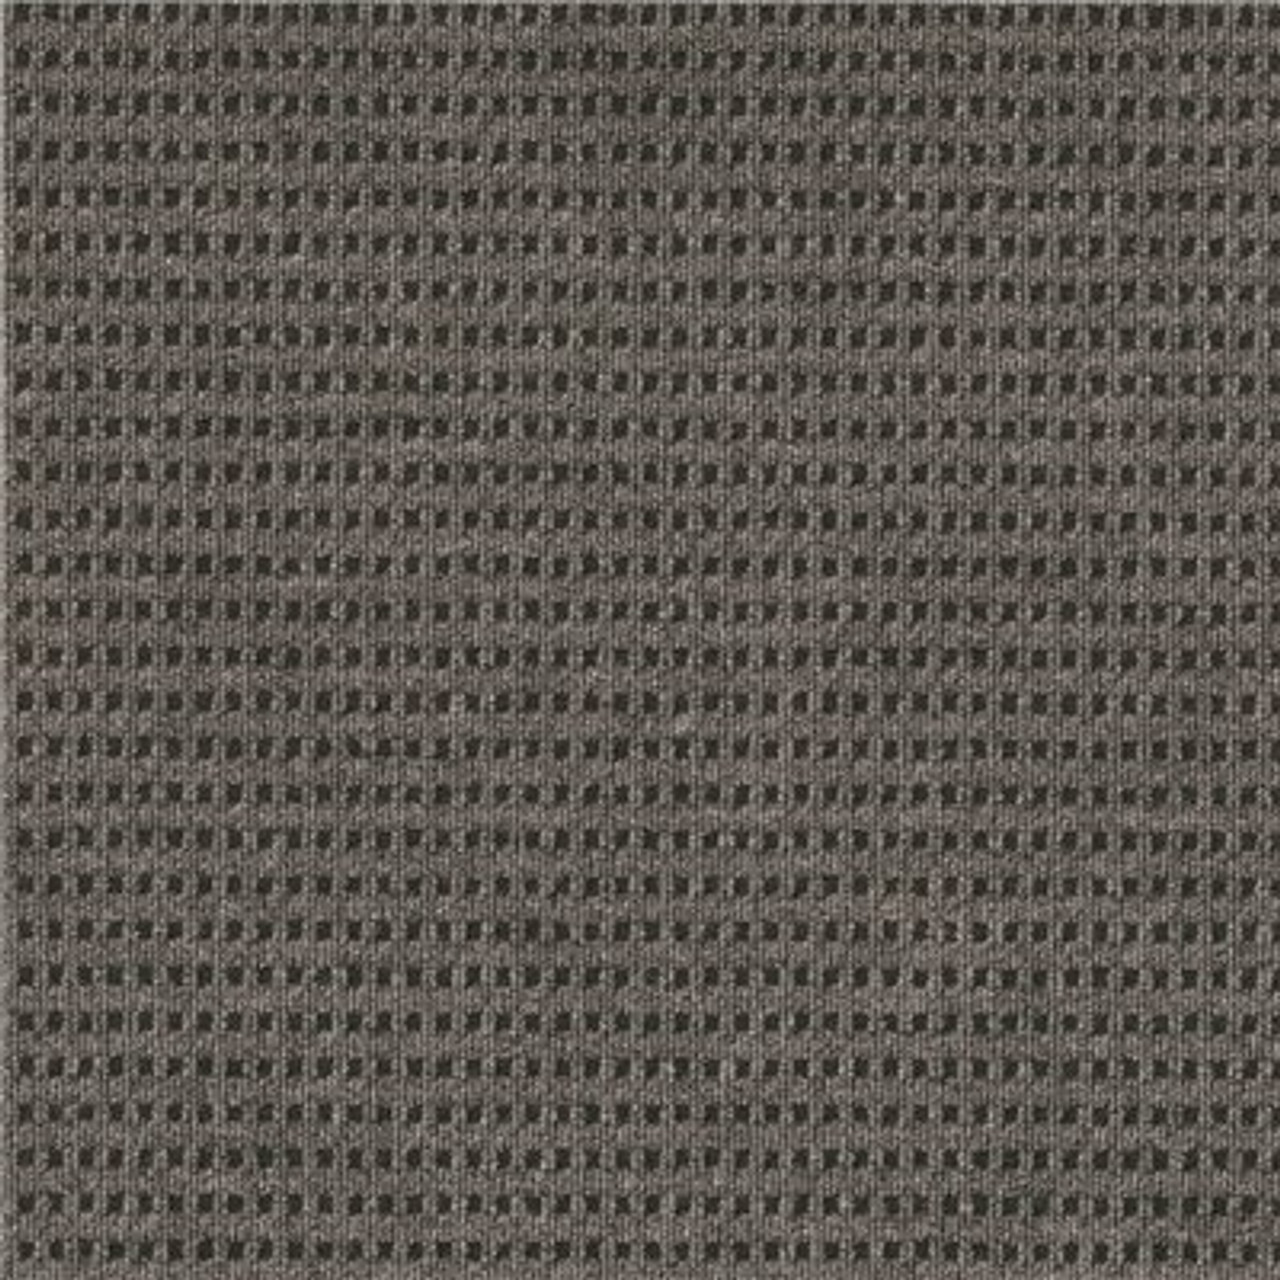 Foss First Impressions Tattersall Smoke W/ Blk 24 In. X 24 In. Commercial Peel And Stick Carpet Tile (15-Tile / Case)